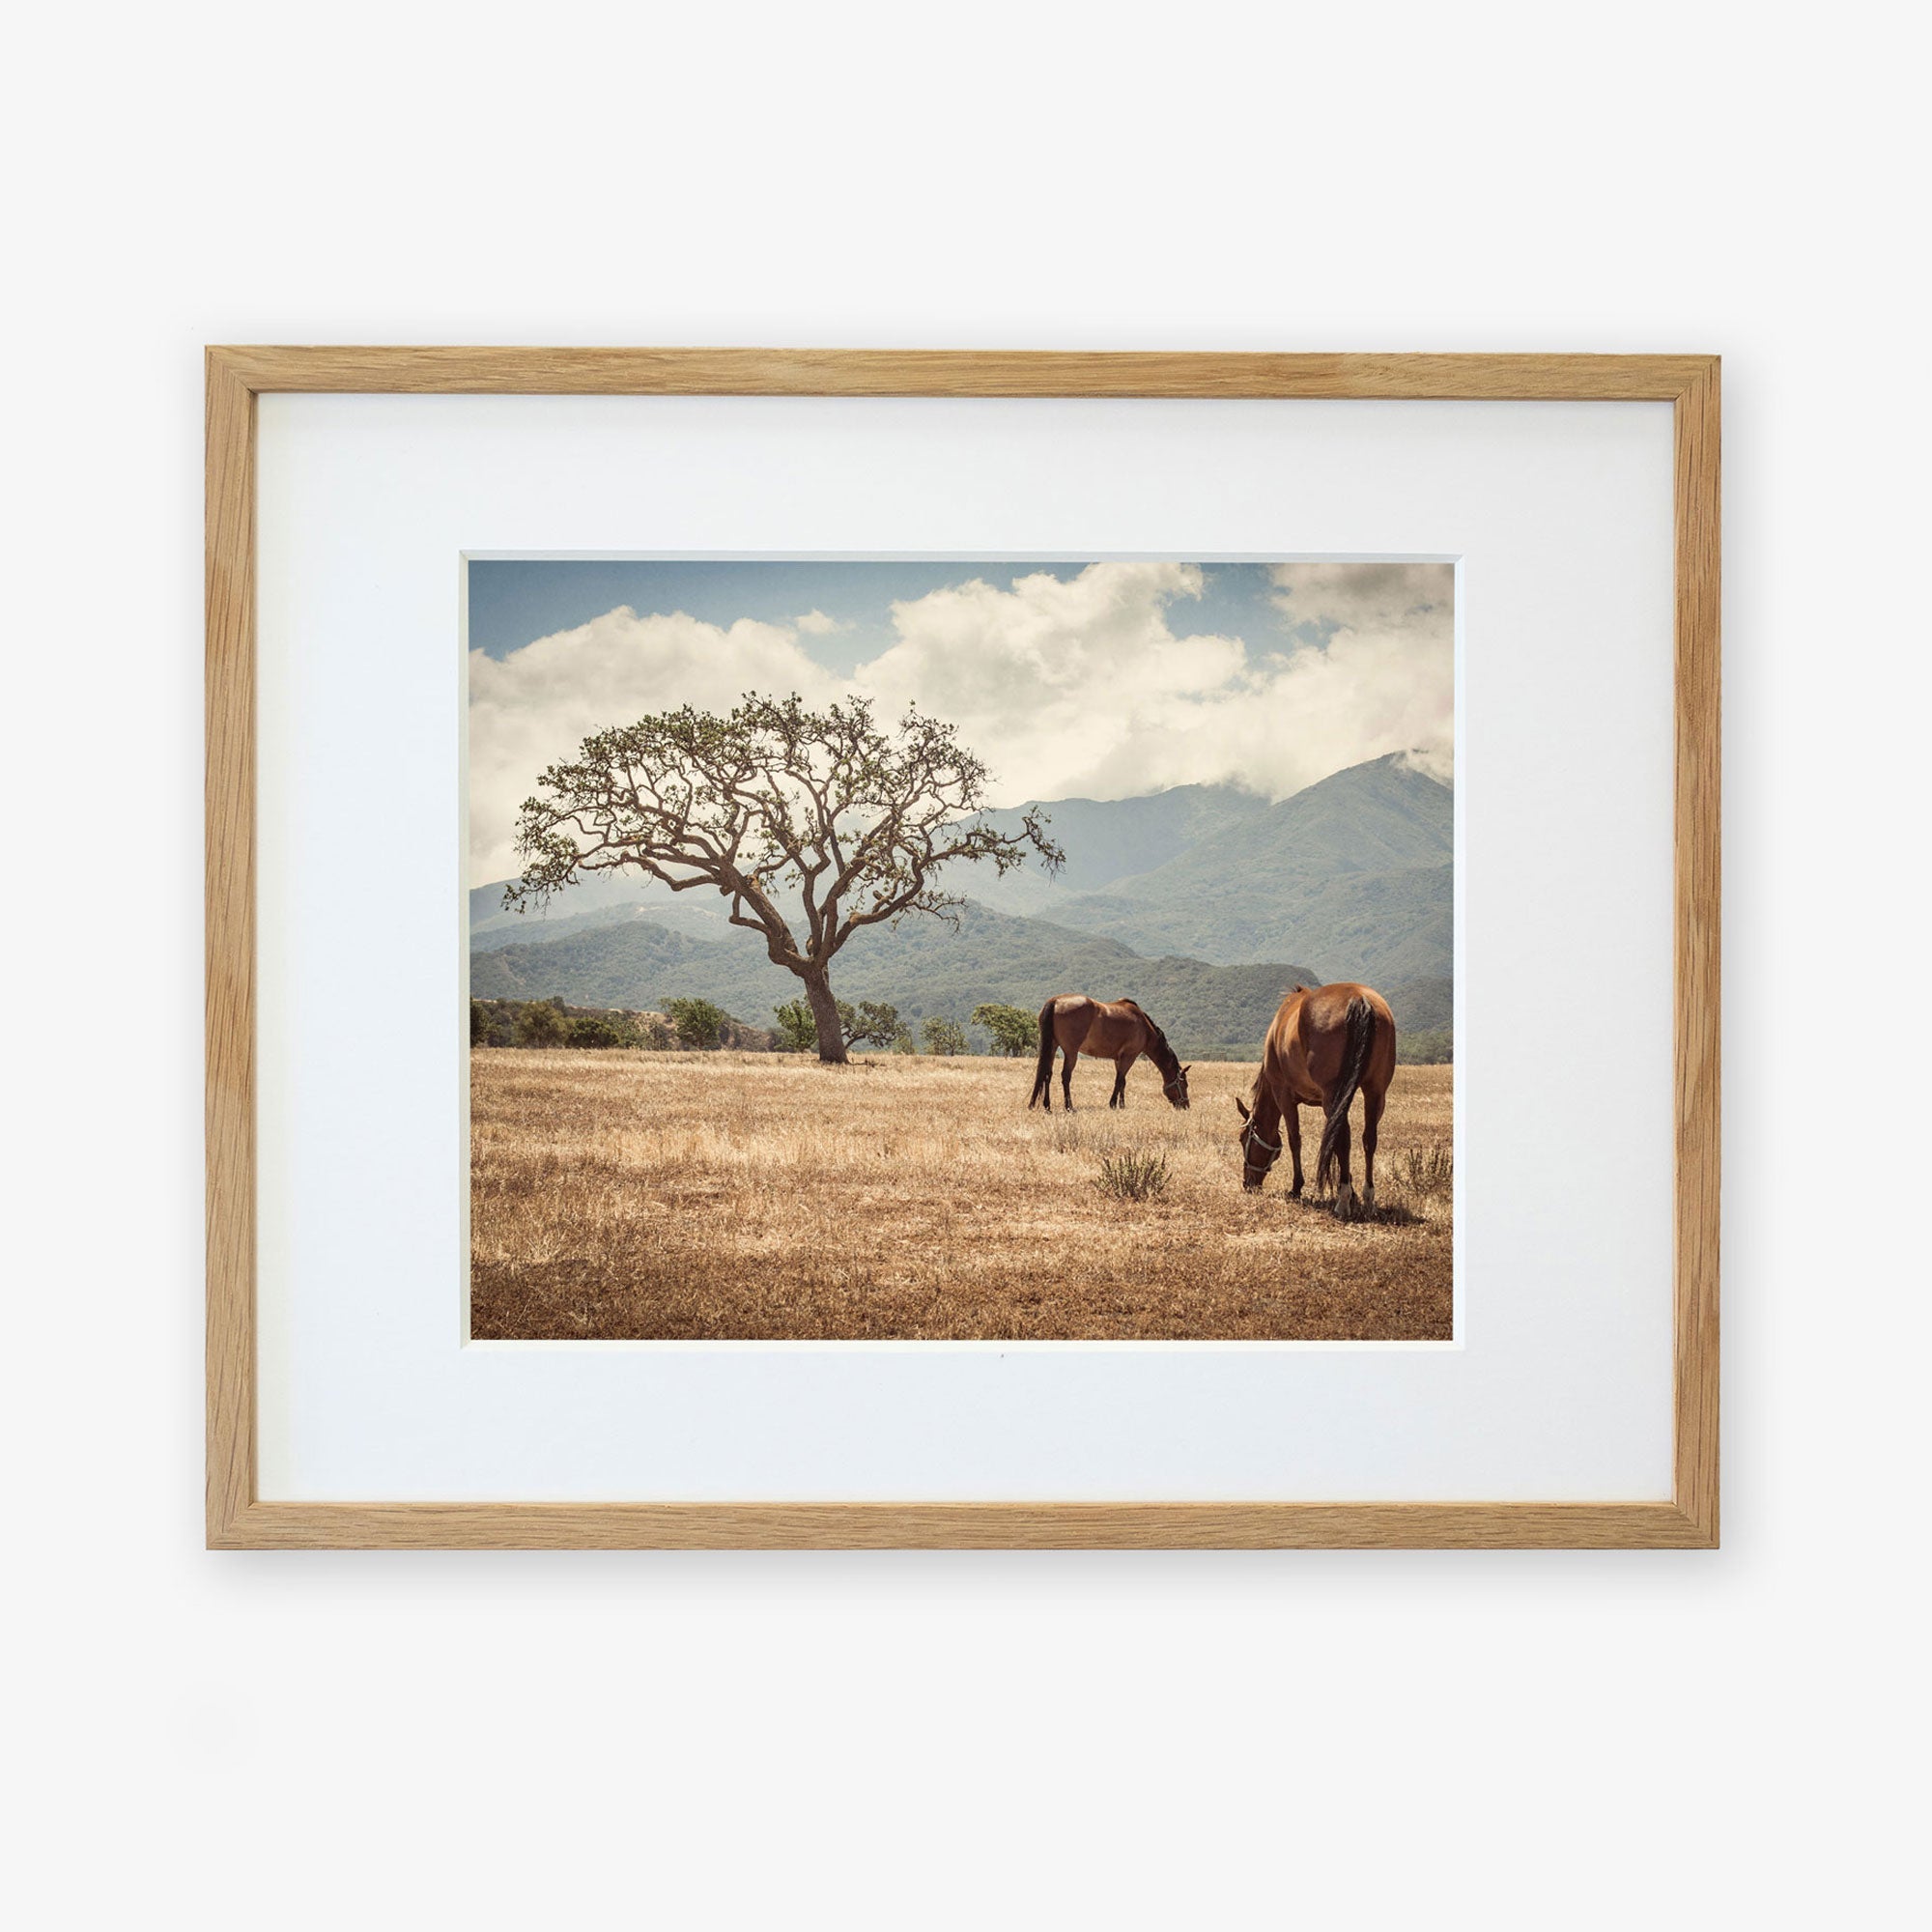 Framed photograph of two horses grazing under a sprawling tree in Santa Ynez Valley, with mountains and clouds in the background. Rustic Print of Horses in a Field, &#39;Santa Ynez Horses&#39; by Offley Green.